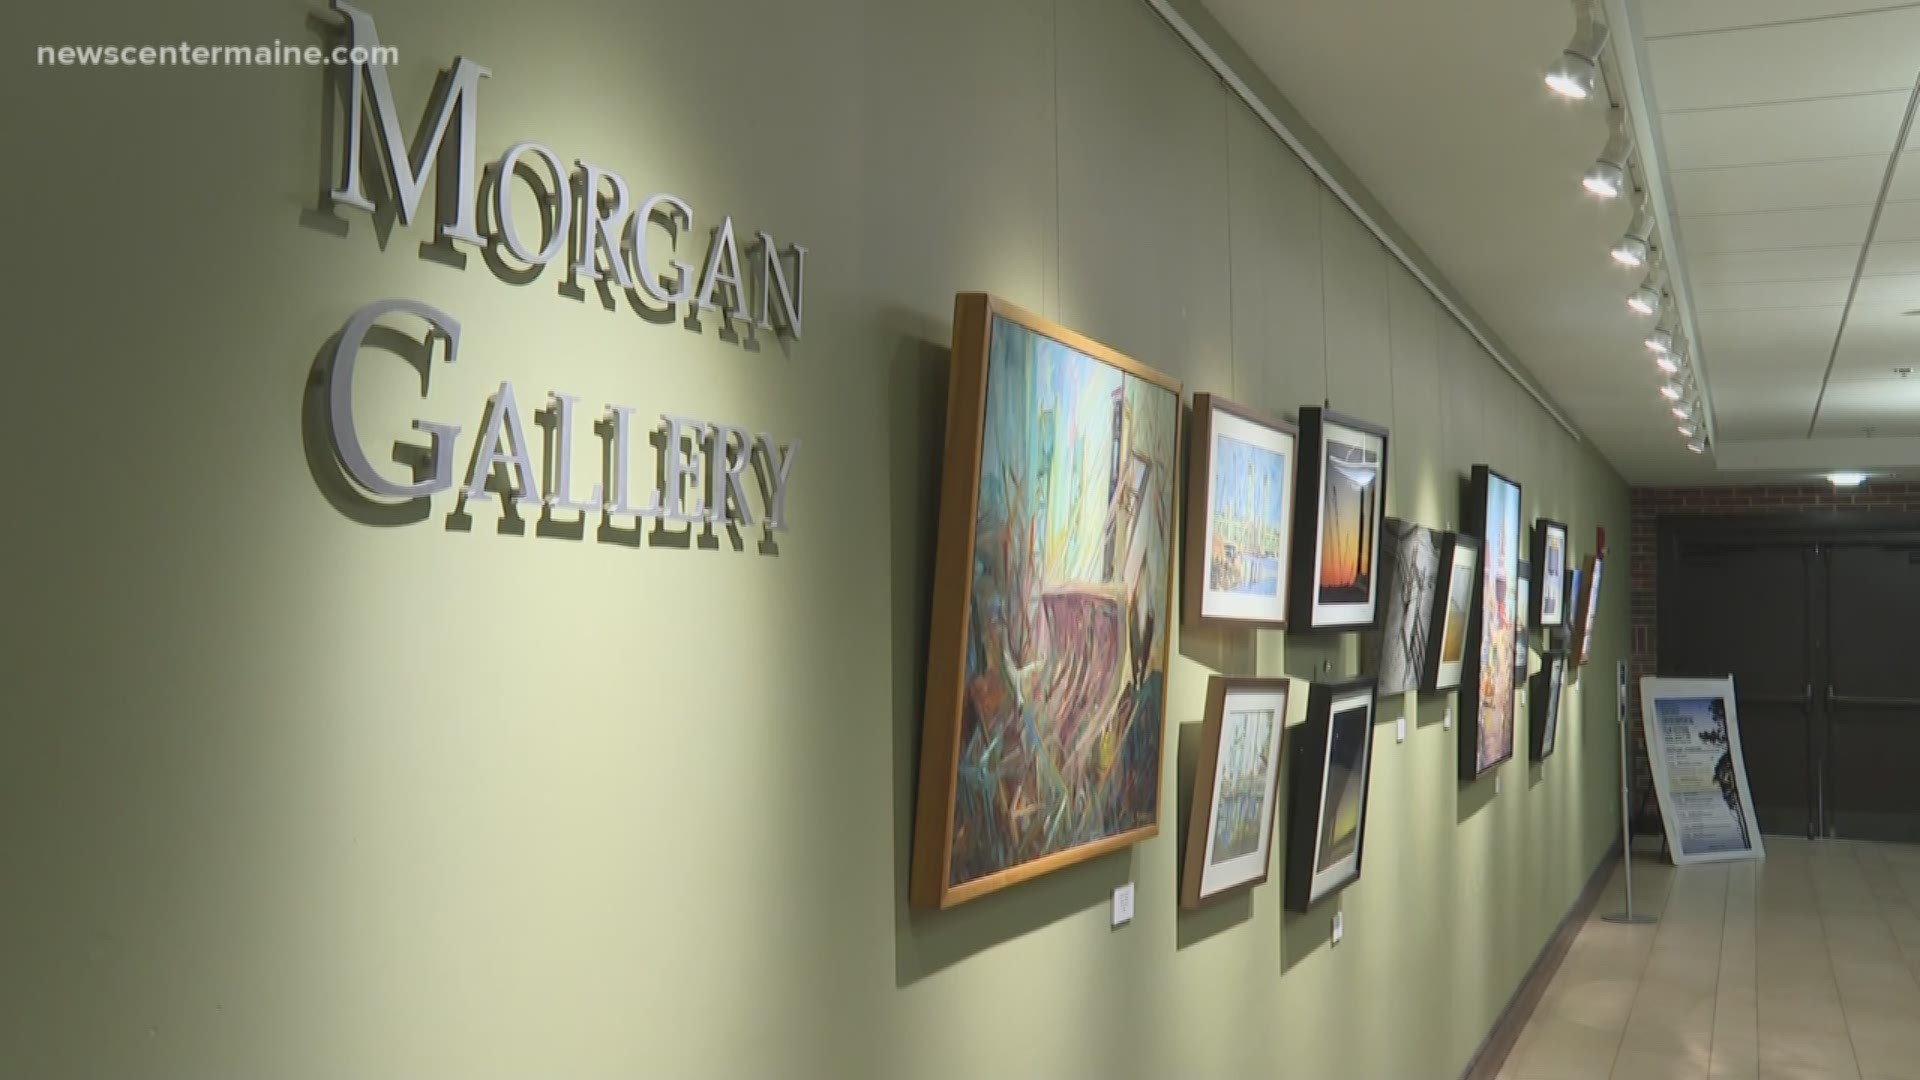 New exhibit opens featuring local artists